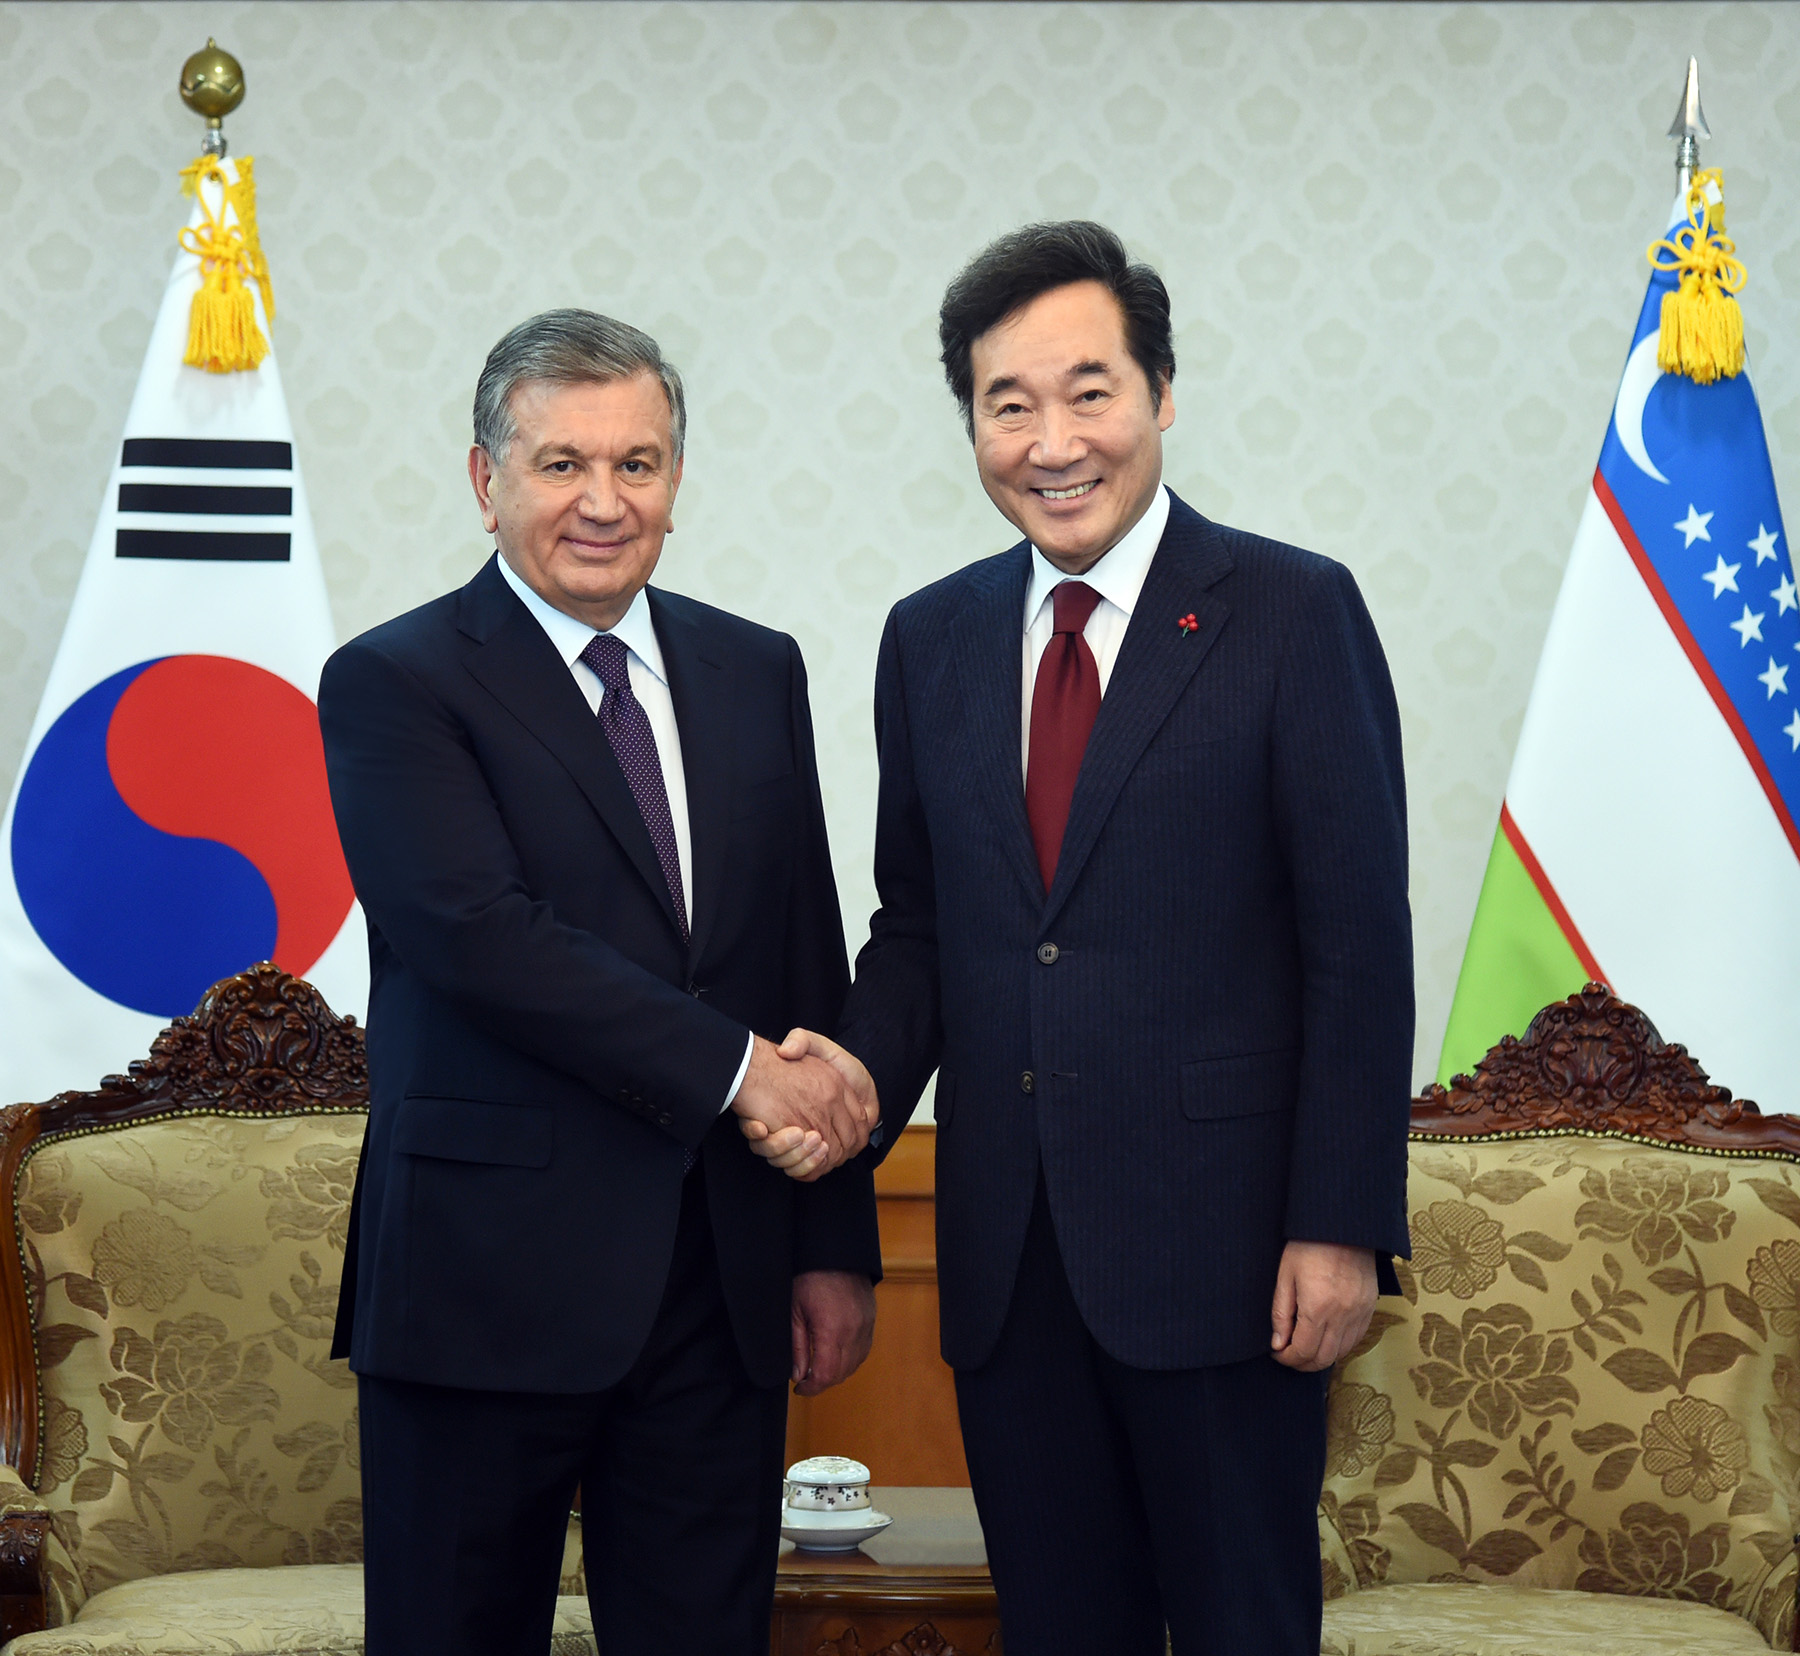 President of Uzbekistan met with the Prime Minister of the Republic of Korea